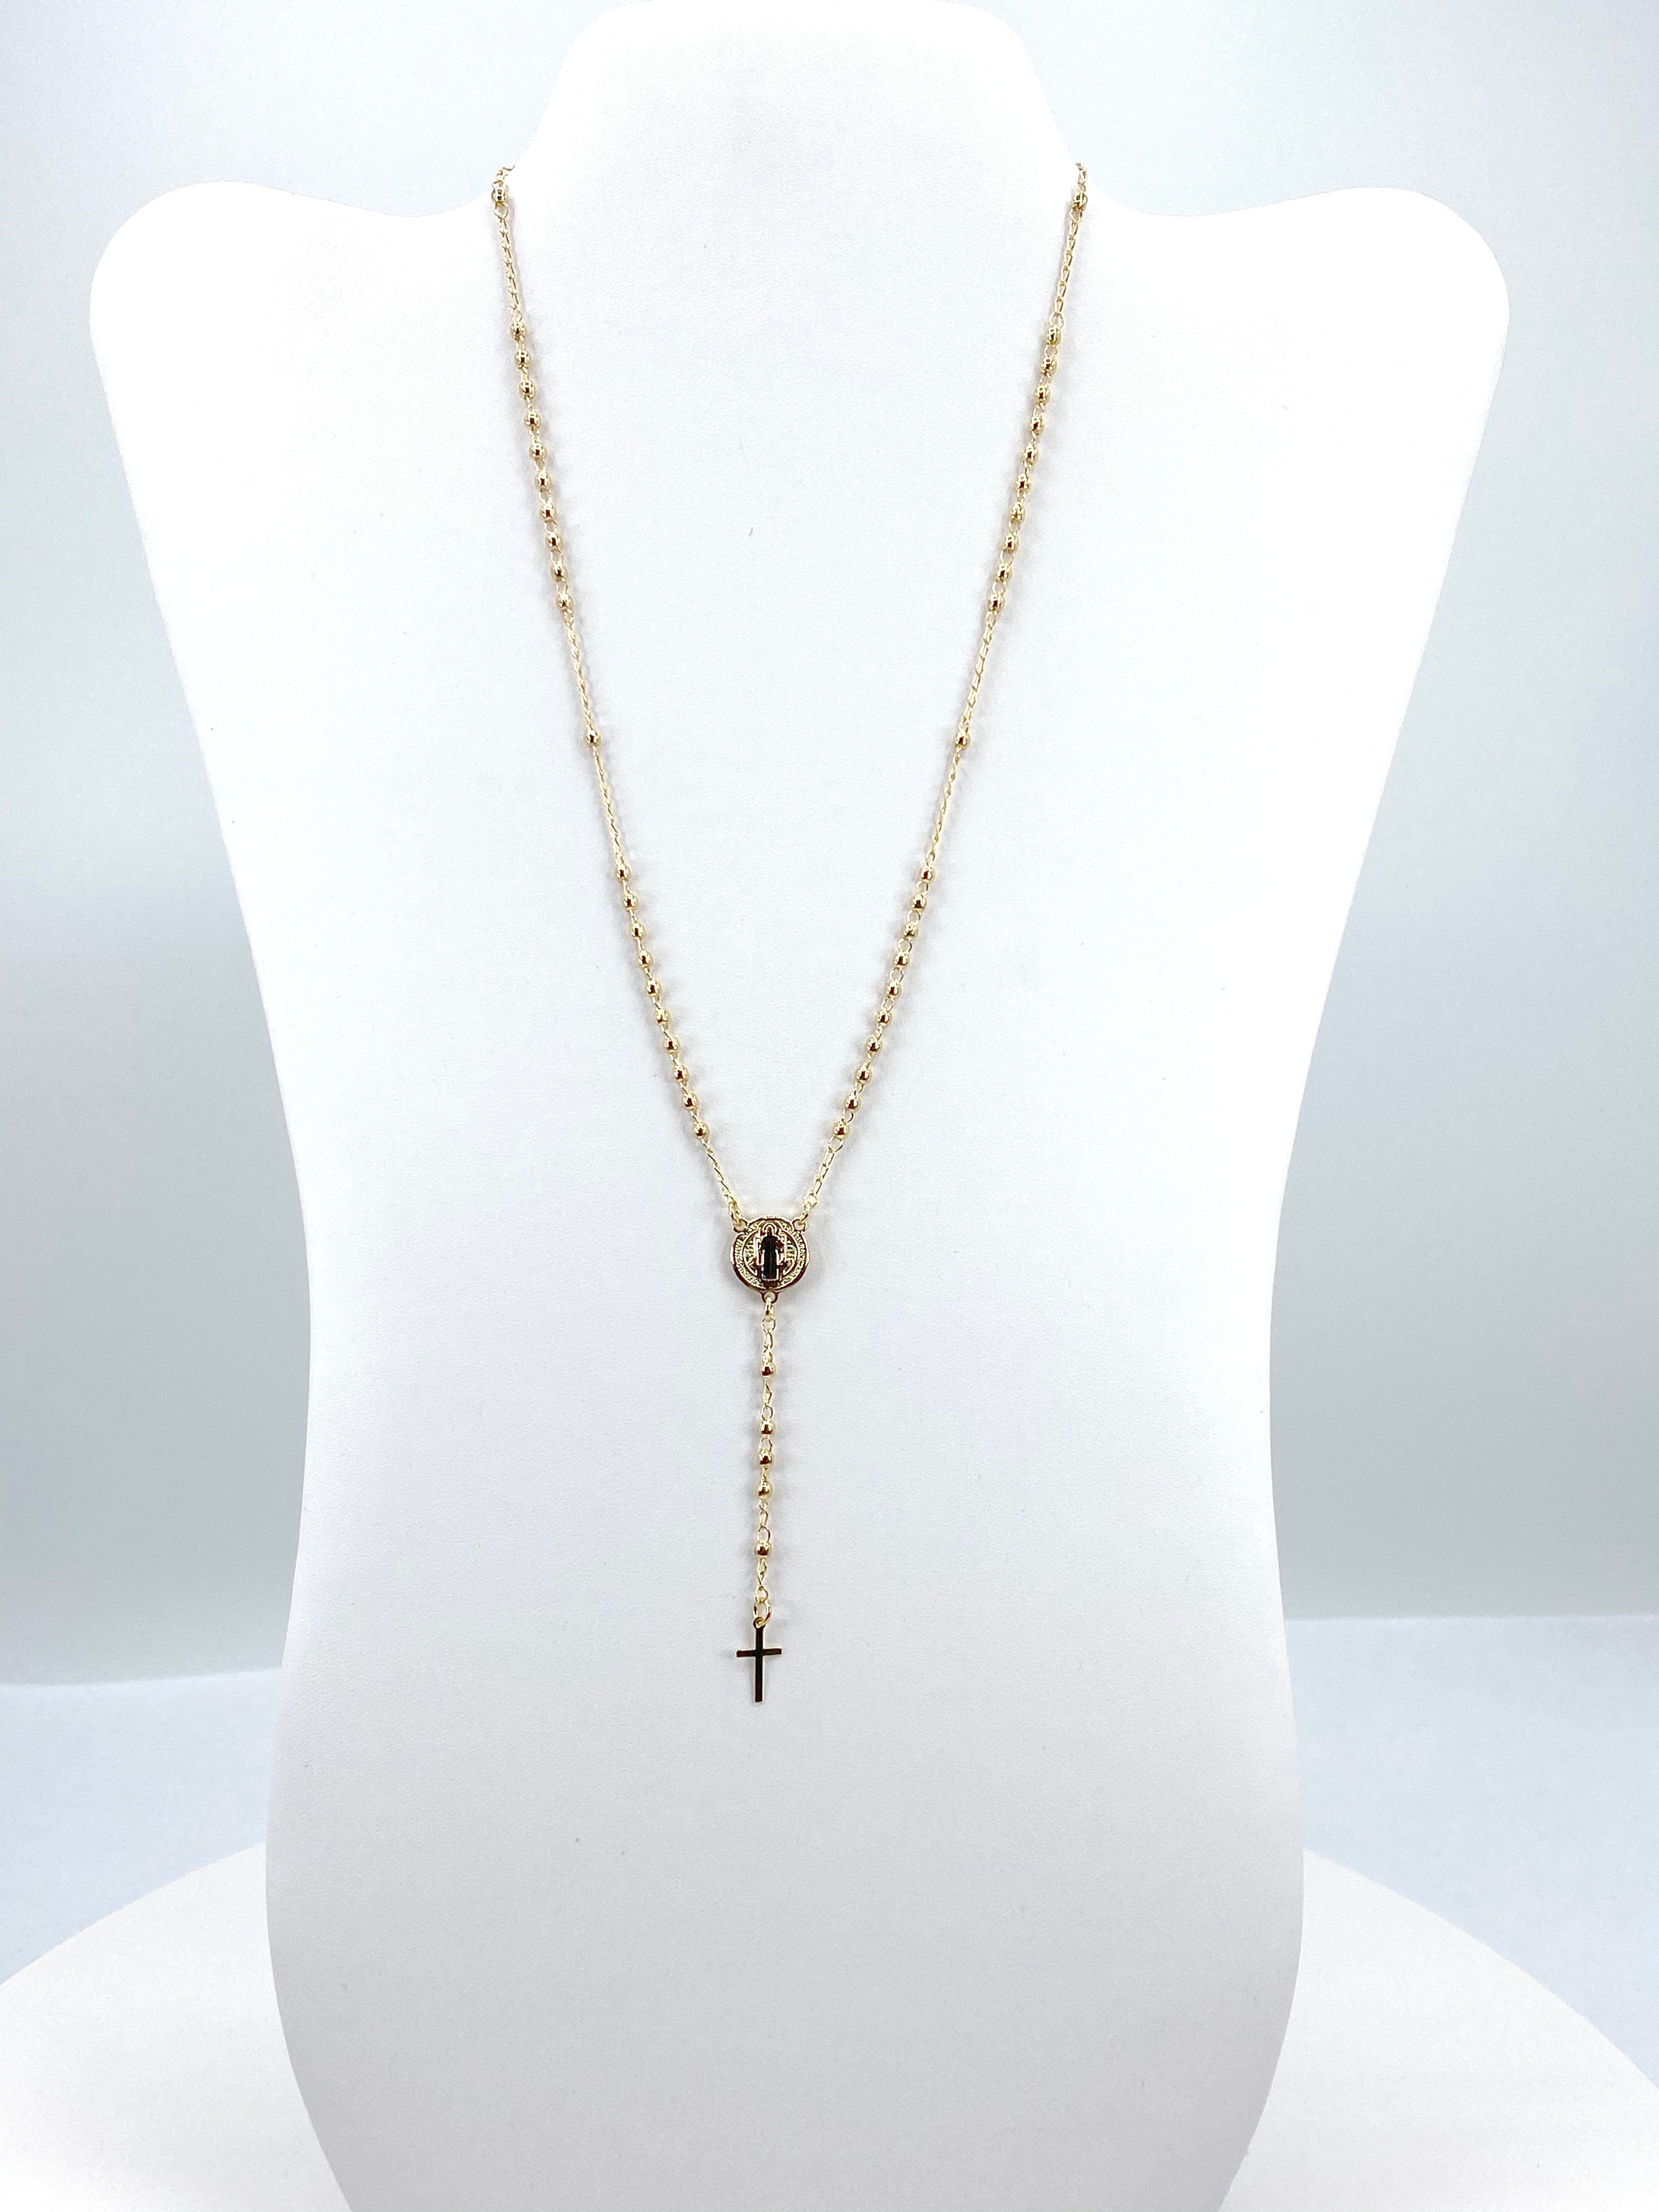 Rosary necklace  with Saint Benedict Medal